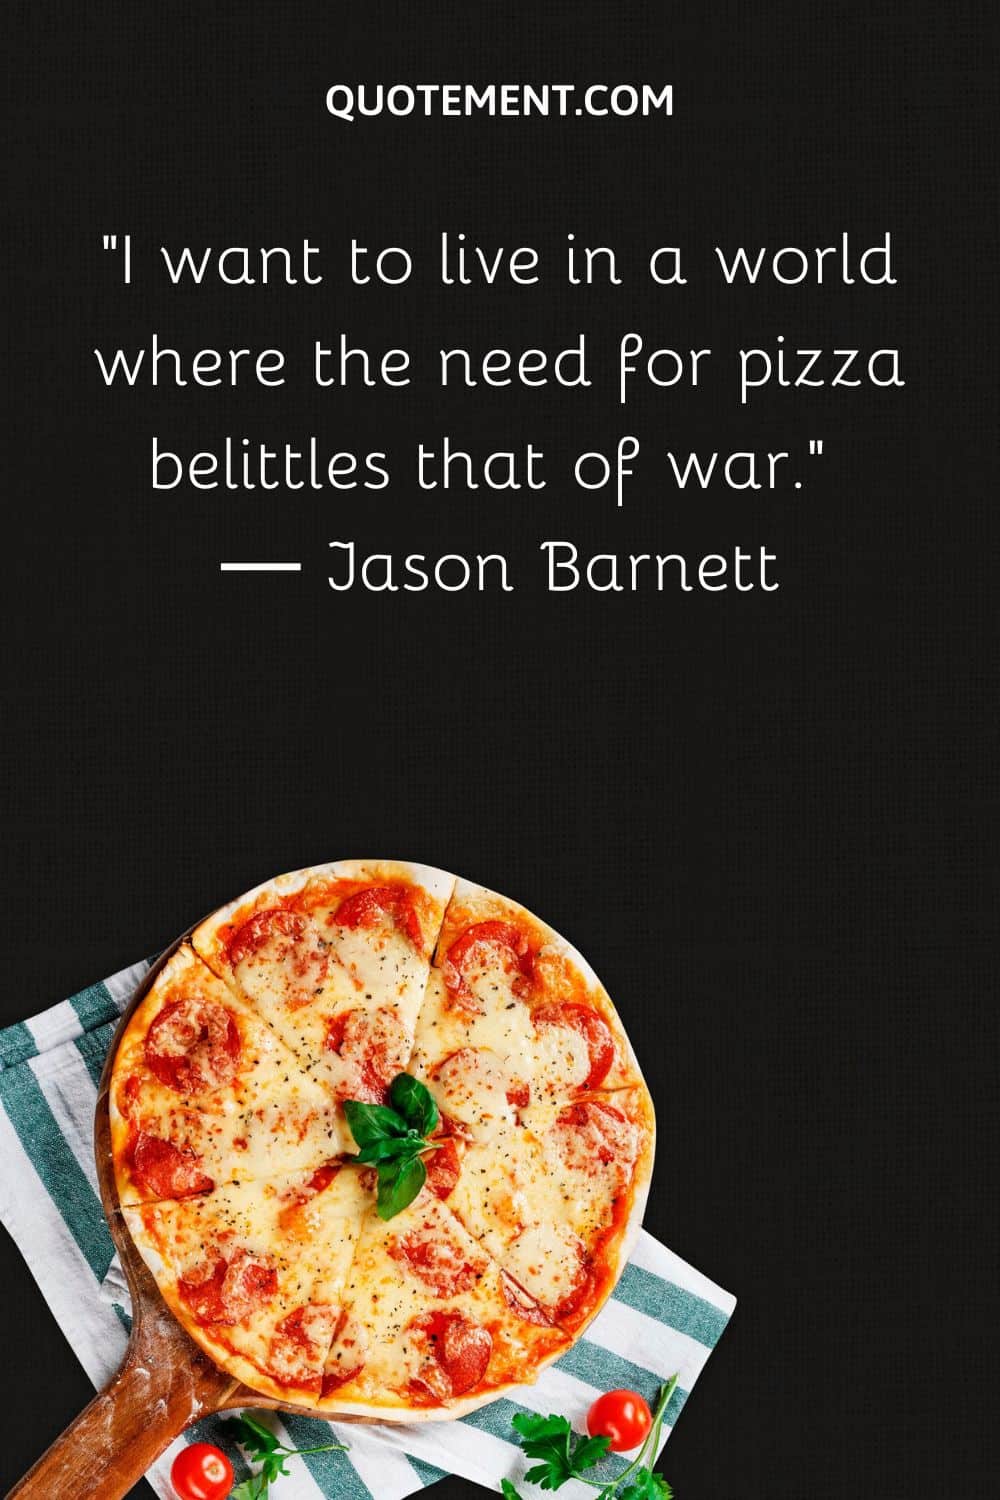 I want to live in a world where the need for pizza belittles that of war